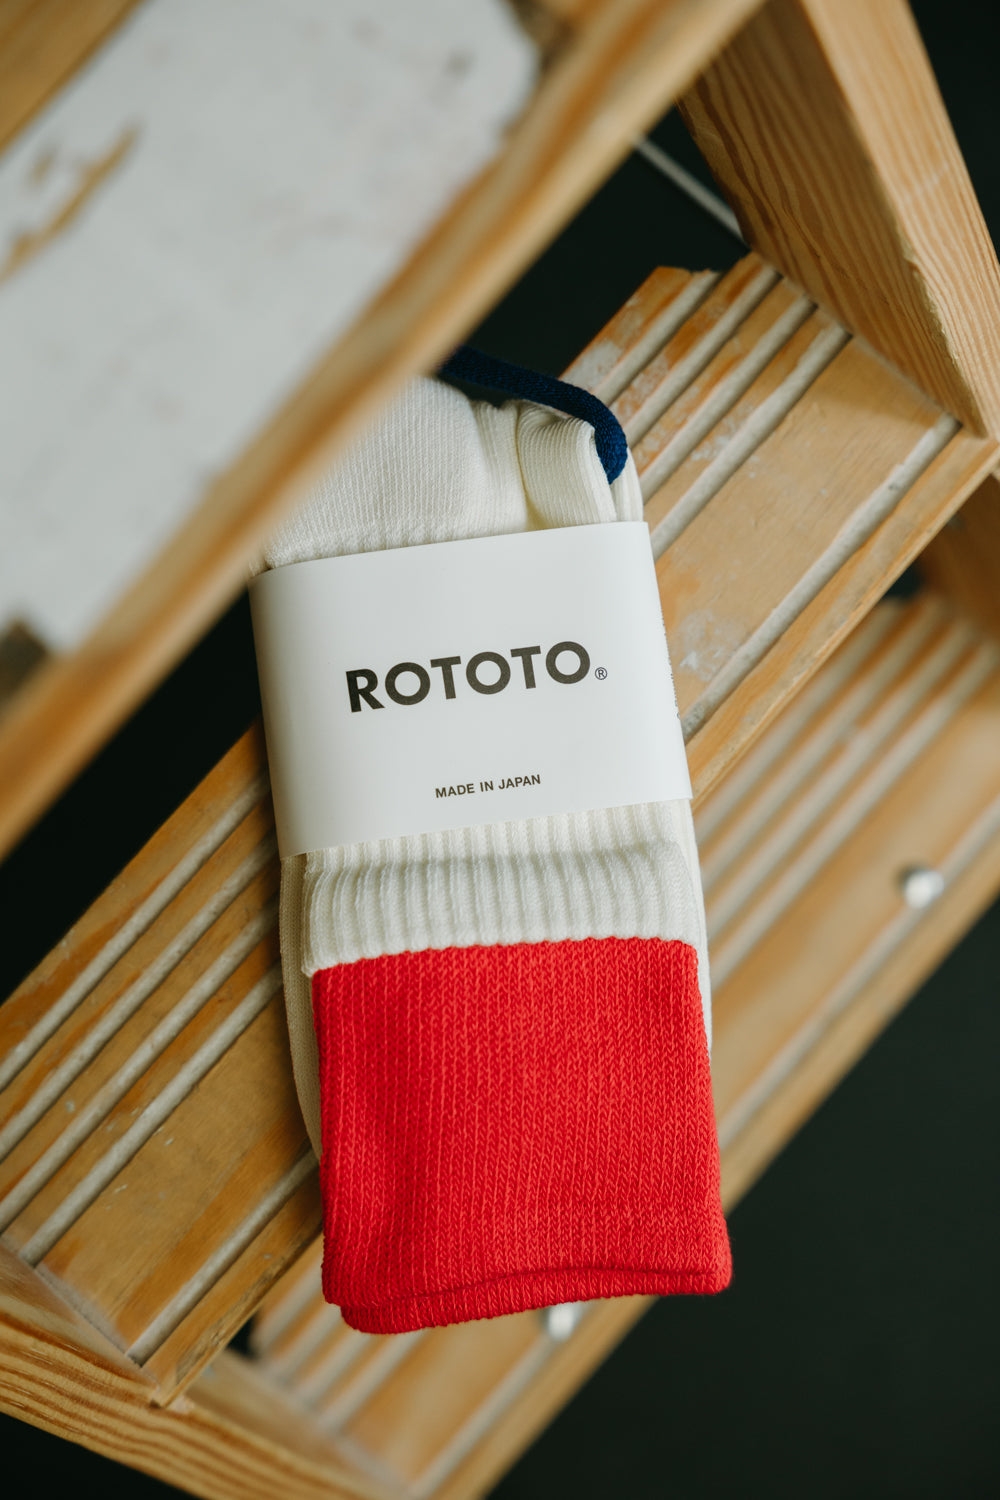 R1421 - Organic Cotton Double Layer Crew Socks - Red, Off White